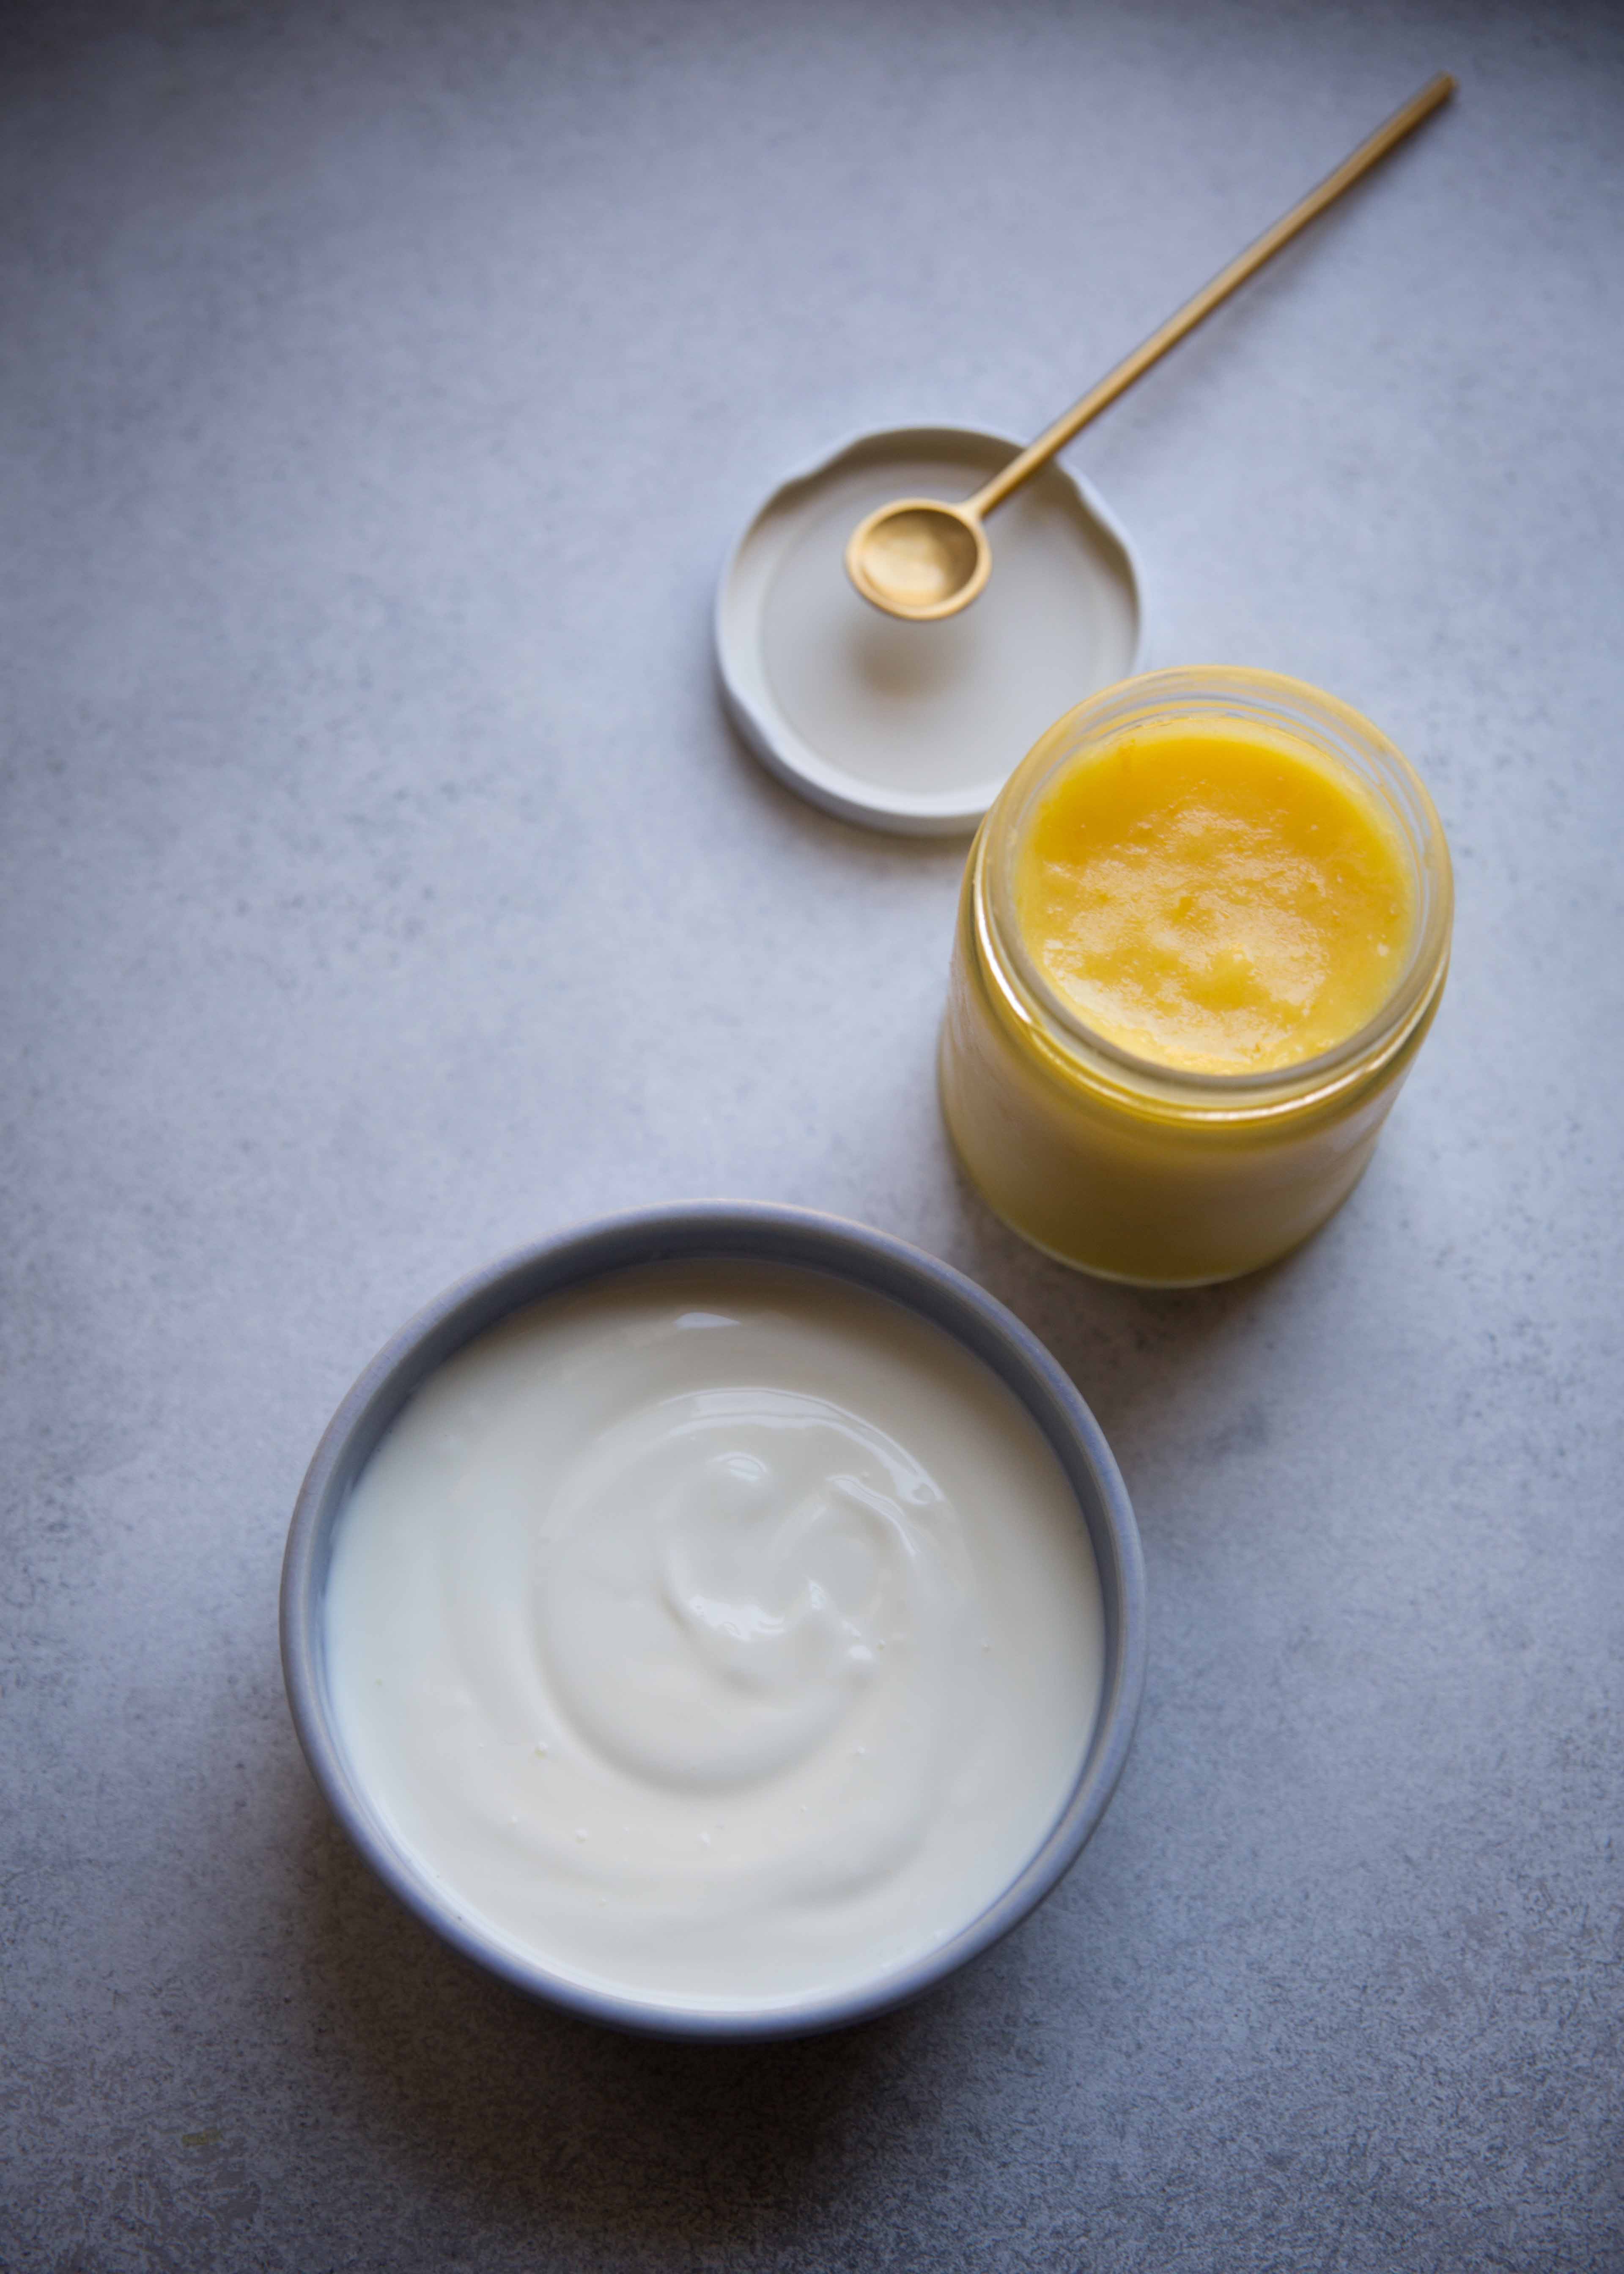 Do you have a buddha's hand? Zest it and mix it into lemon curd yogurt for a dreamy treat.